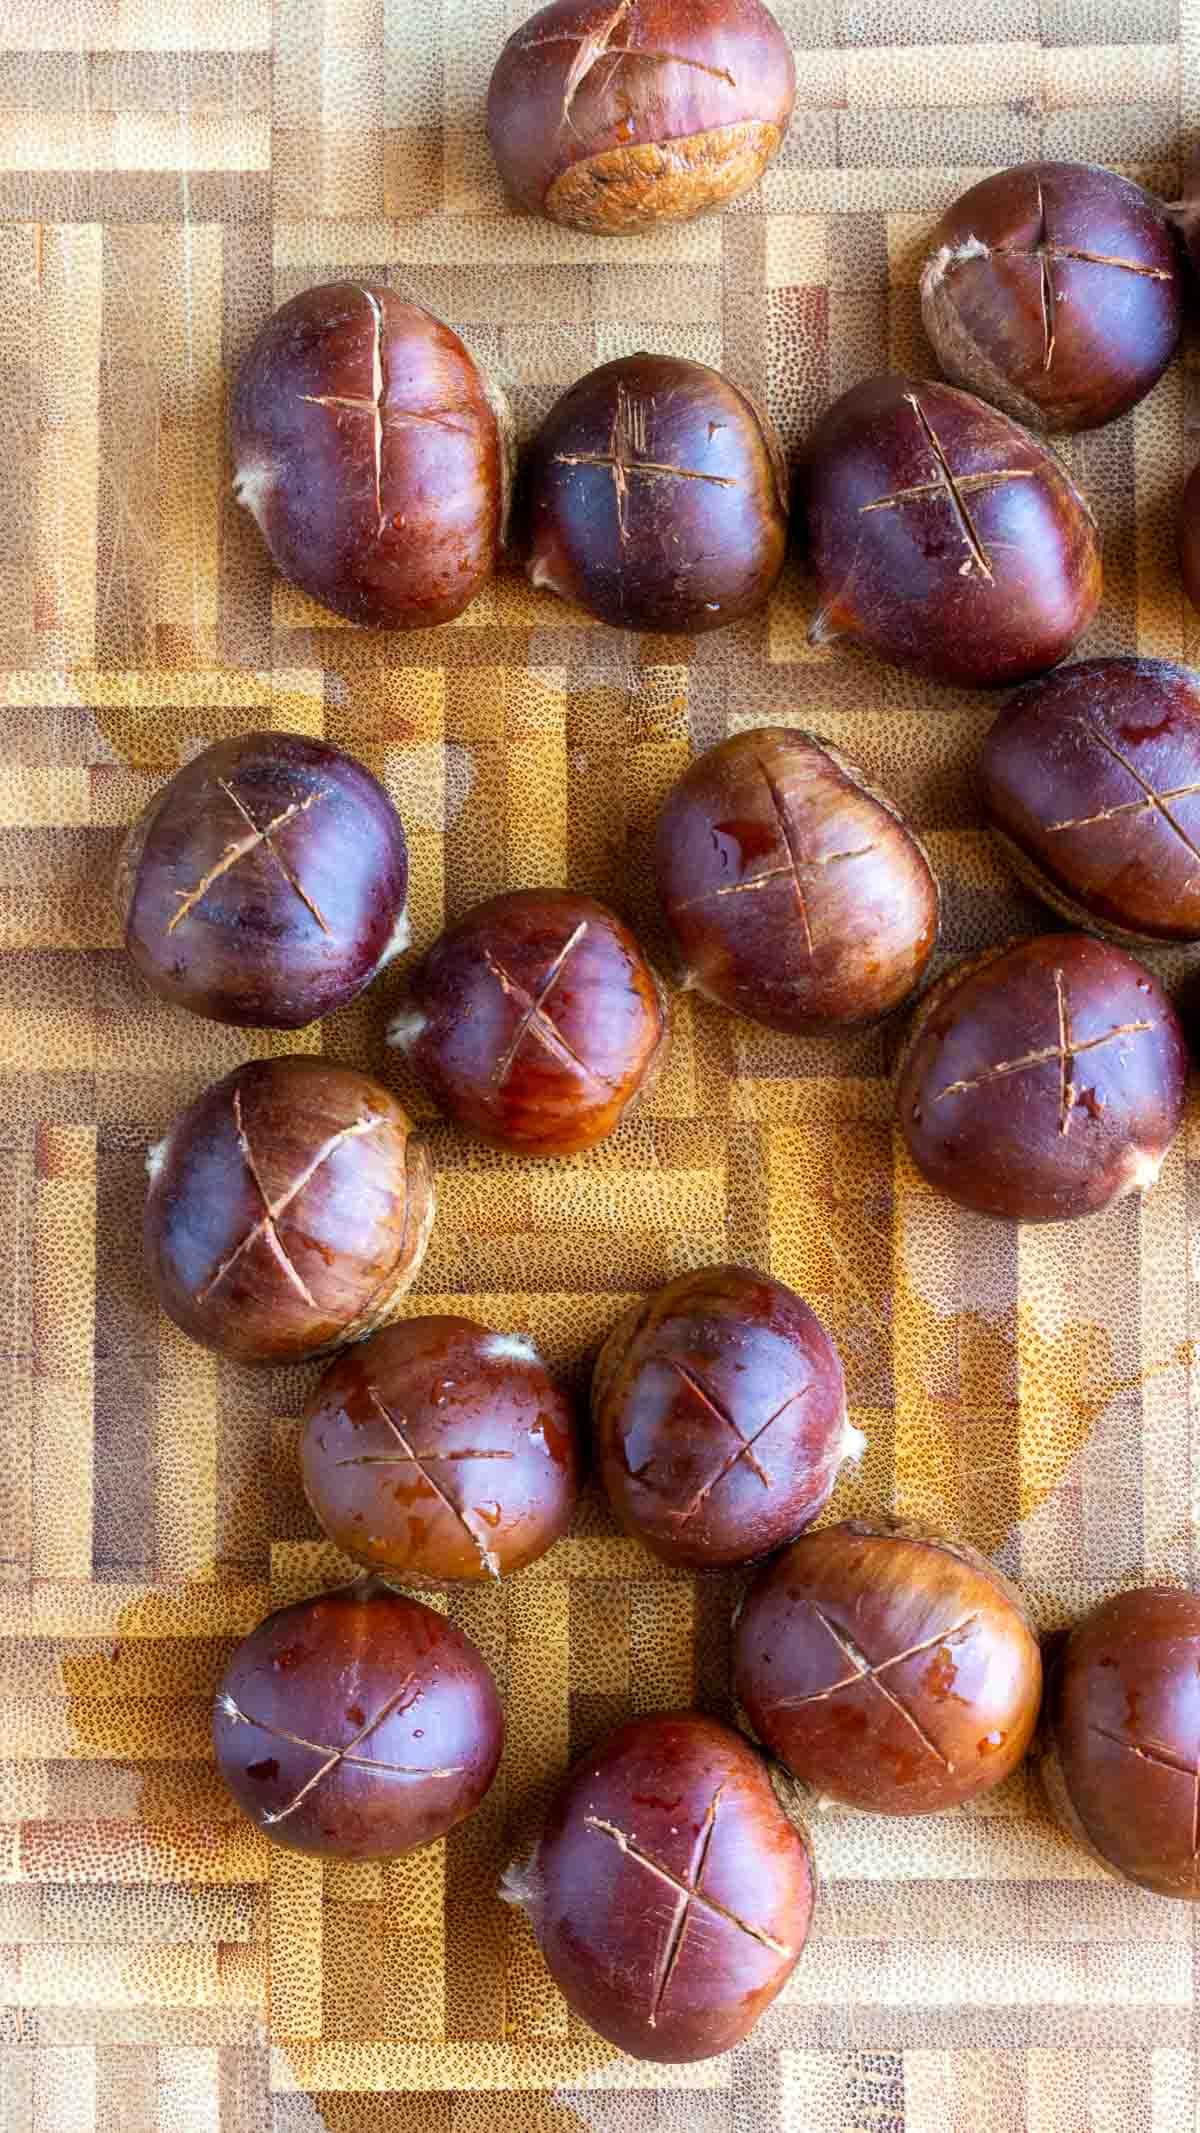 Raw chestnuts with a score of an "X" on a cutting board